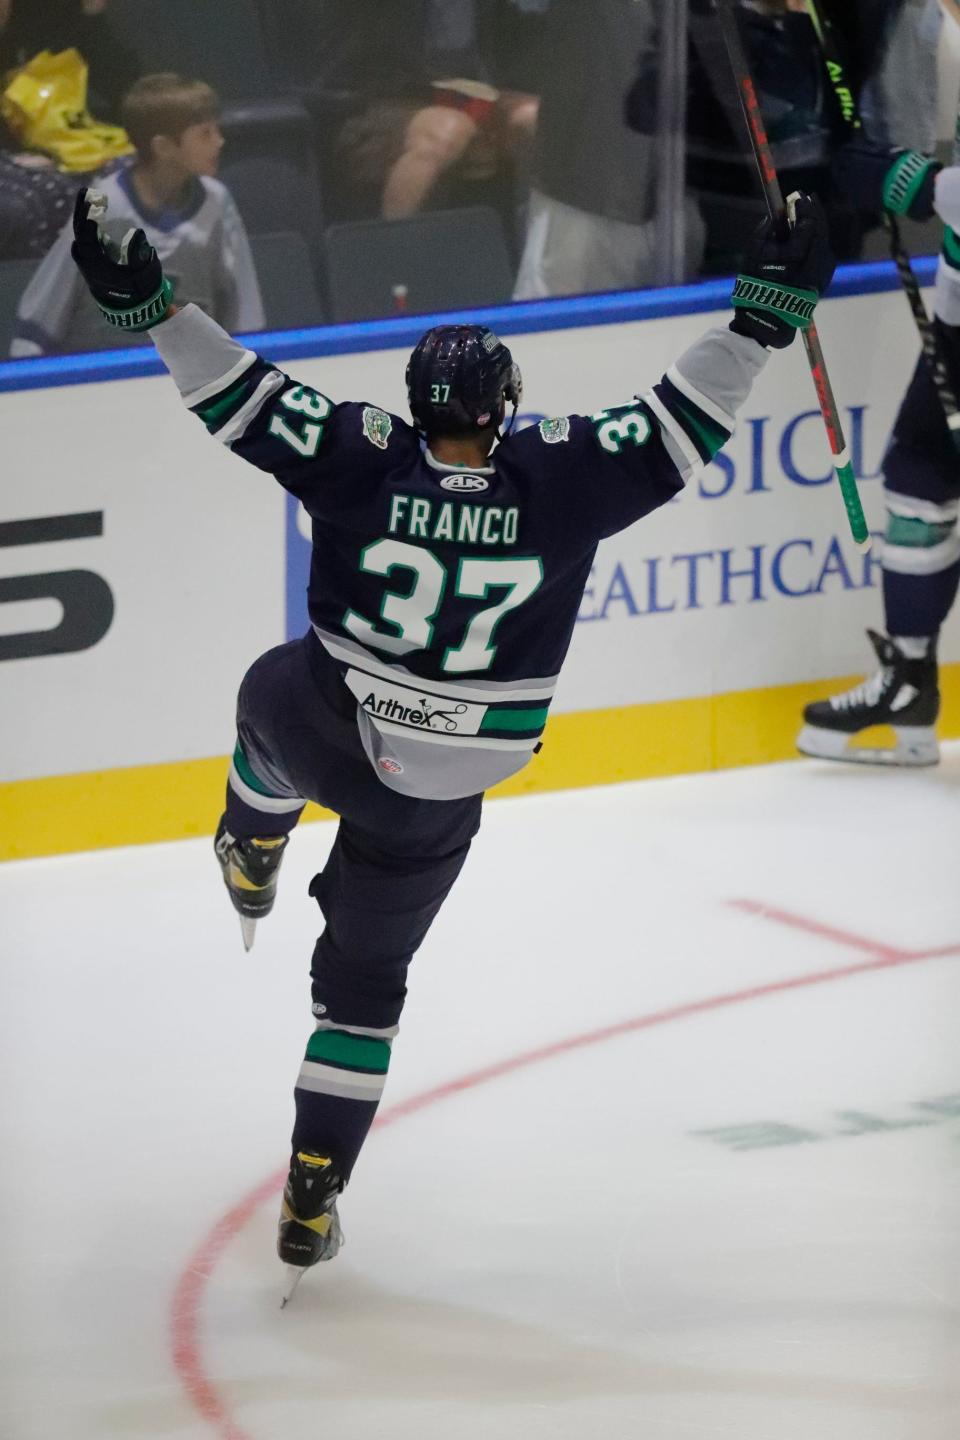 Florida Everblades raise Kelly Cup championship banner then shut out